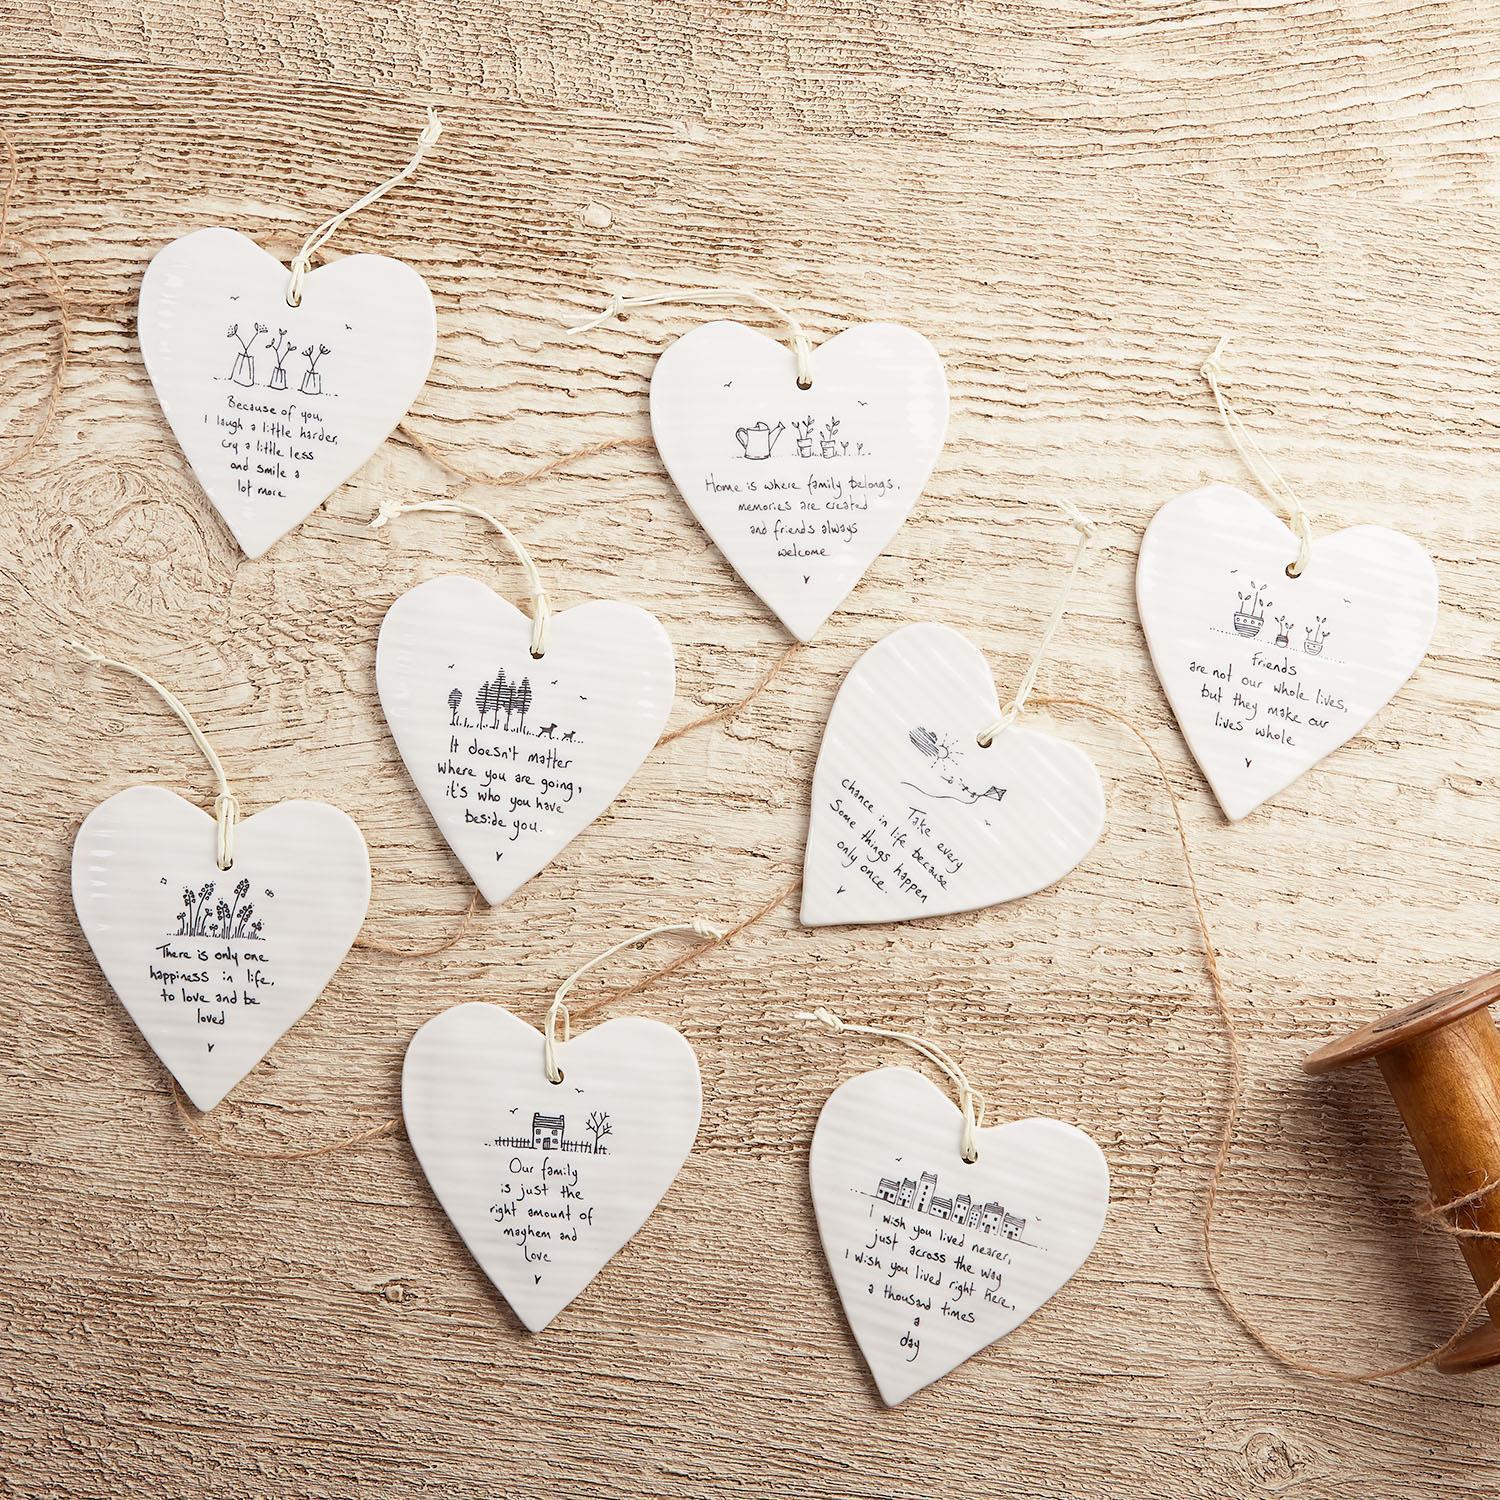 Ceramic Heart with Embossed Sentiment - 3-3/4-in - Mellow Monkey